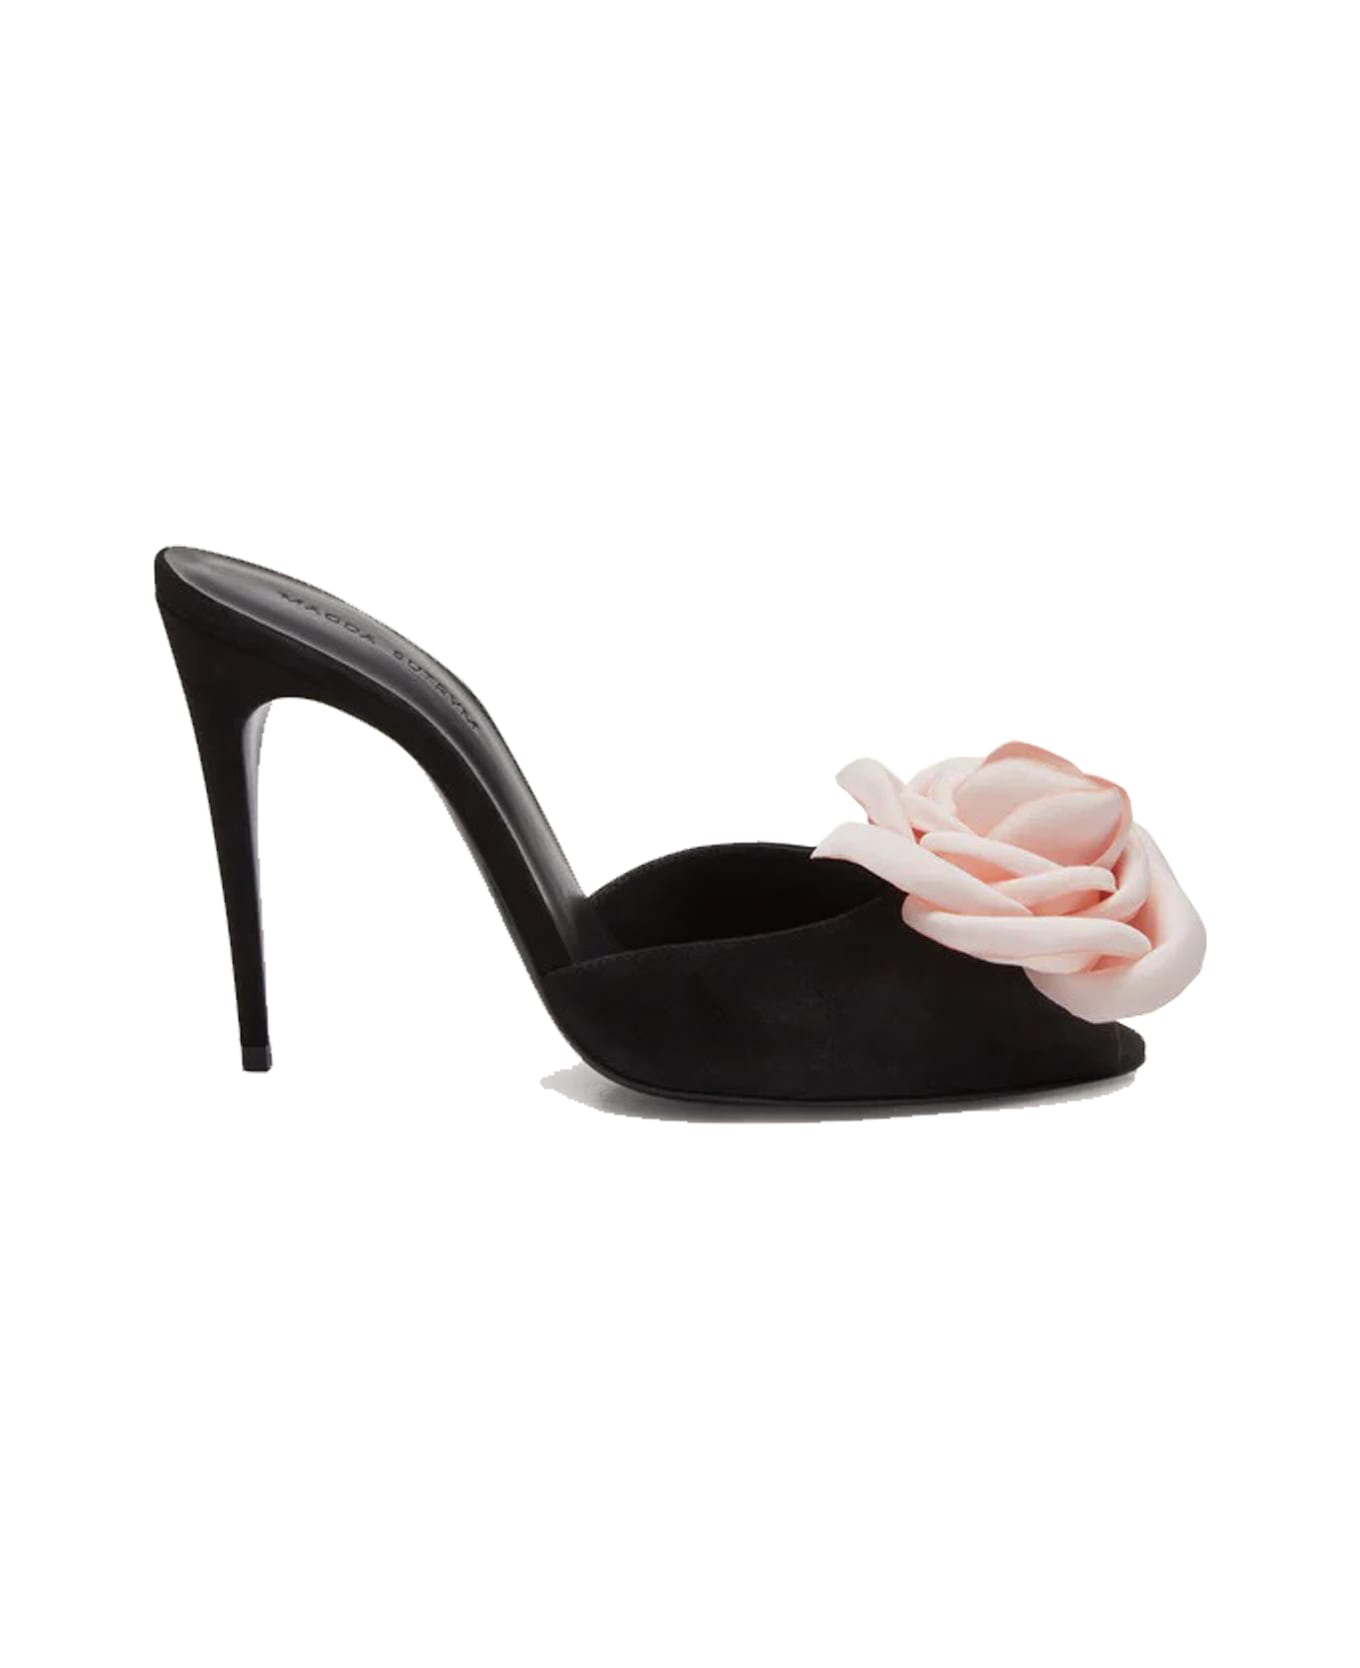 Magda Butrym Shoes With Heels - Black